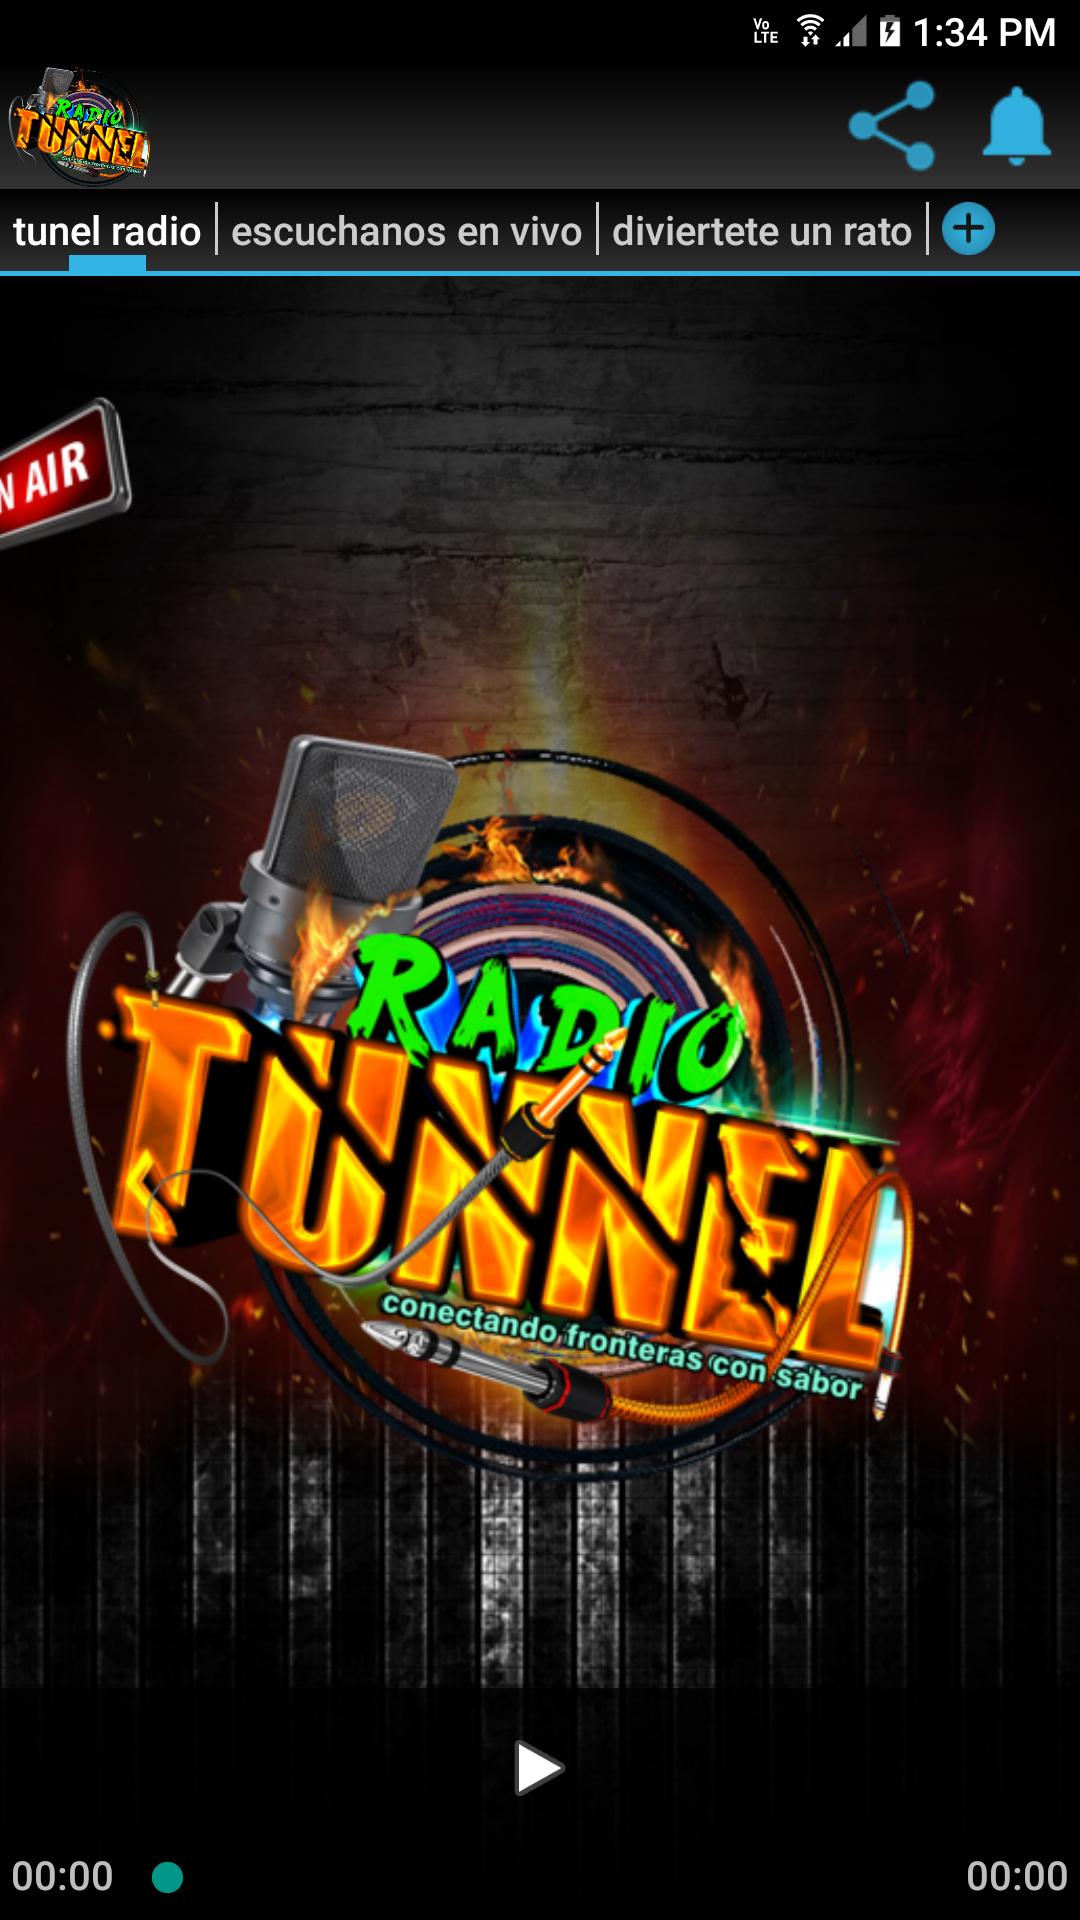 radio tunnel for Android - APK Download